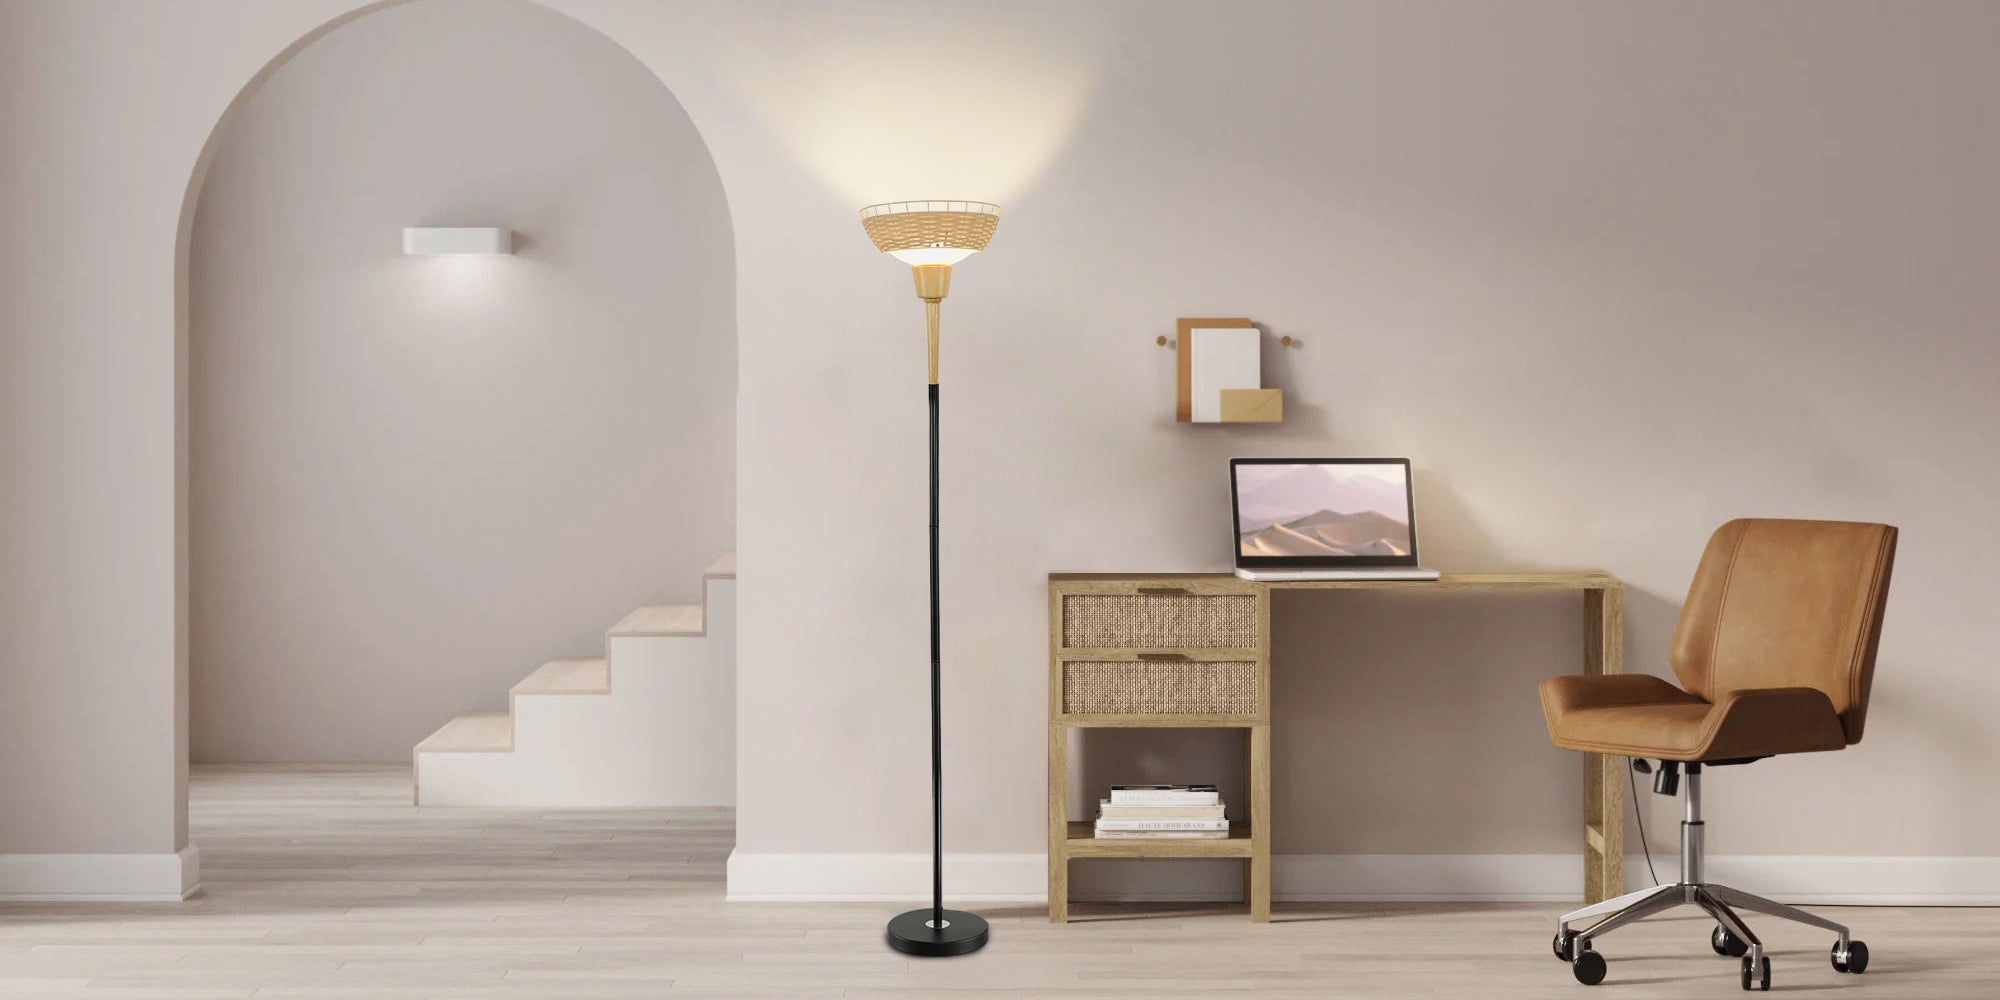 Depuley Sky LED Torchiere Standing Floor Lamp, Modern 69 inch Tall Pole Light with Rattan and Glass Shade, Uplight Lamps Lighting for Living Room Bedroom Office, 9W 3000K